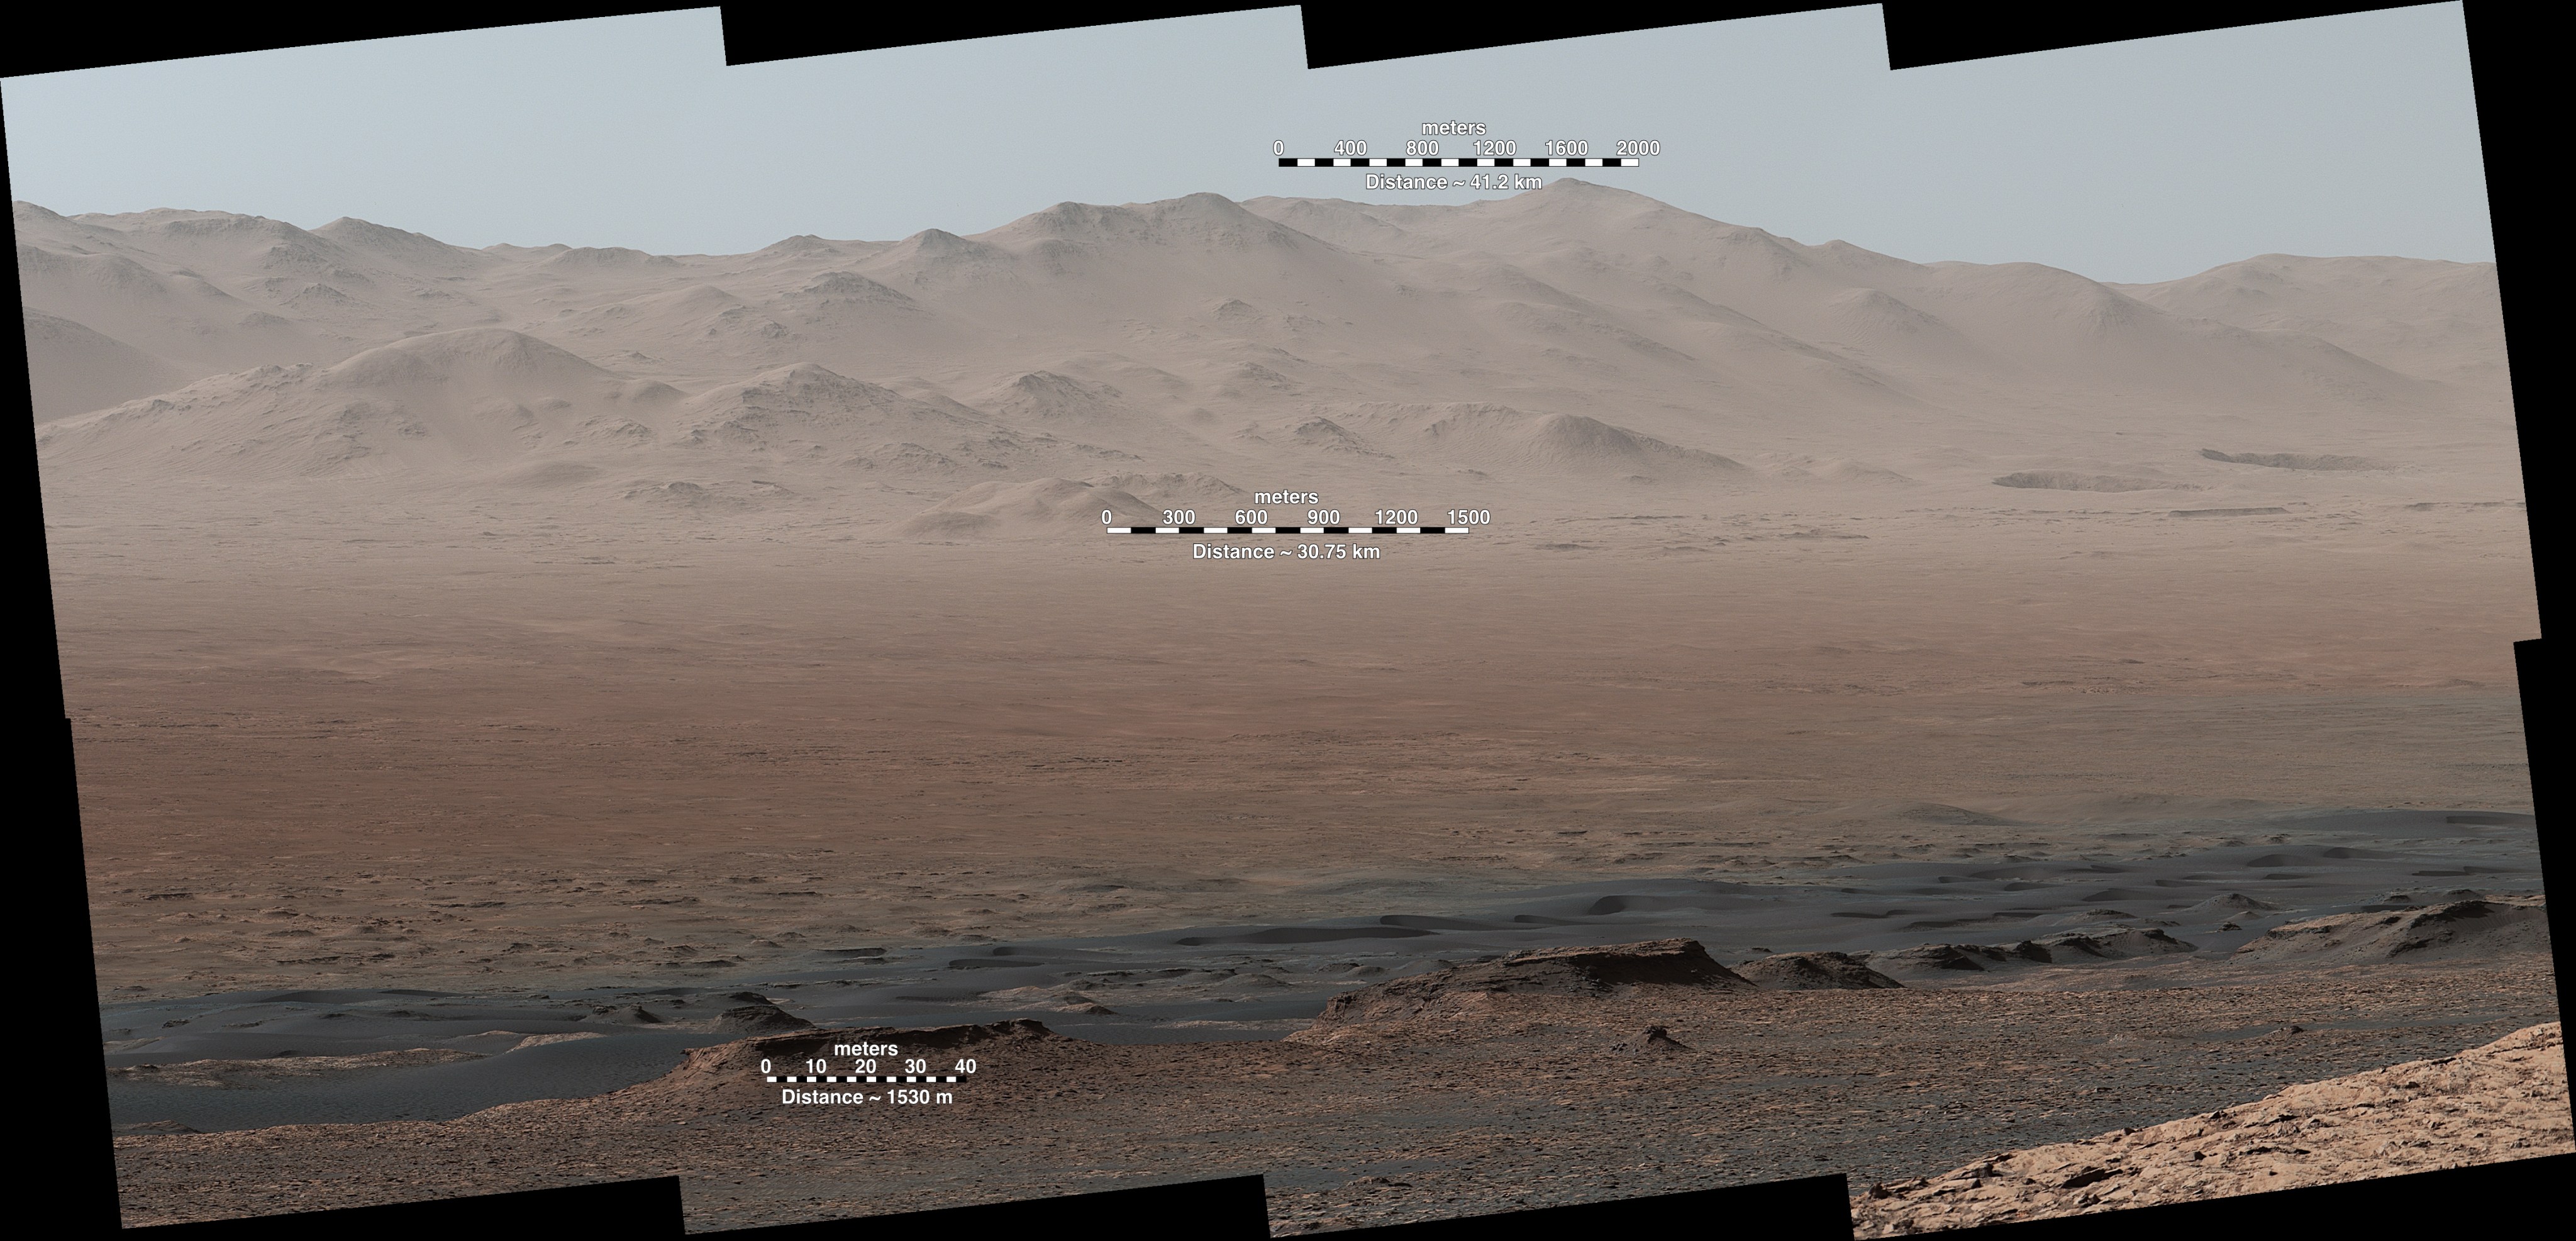 Telephoto Vista from Ridge in Mars' Gale Crater (Scale Bars)